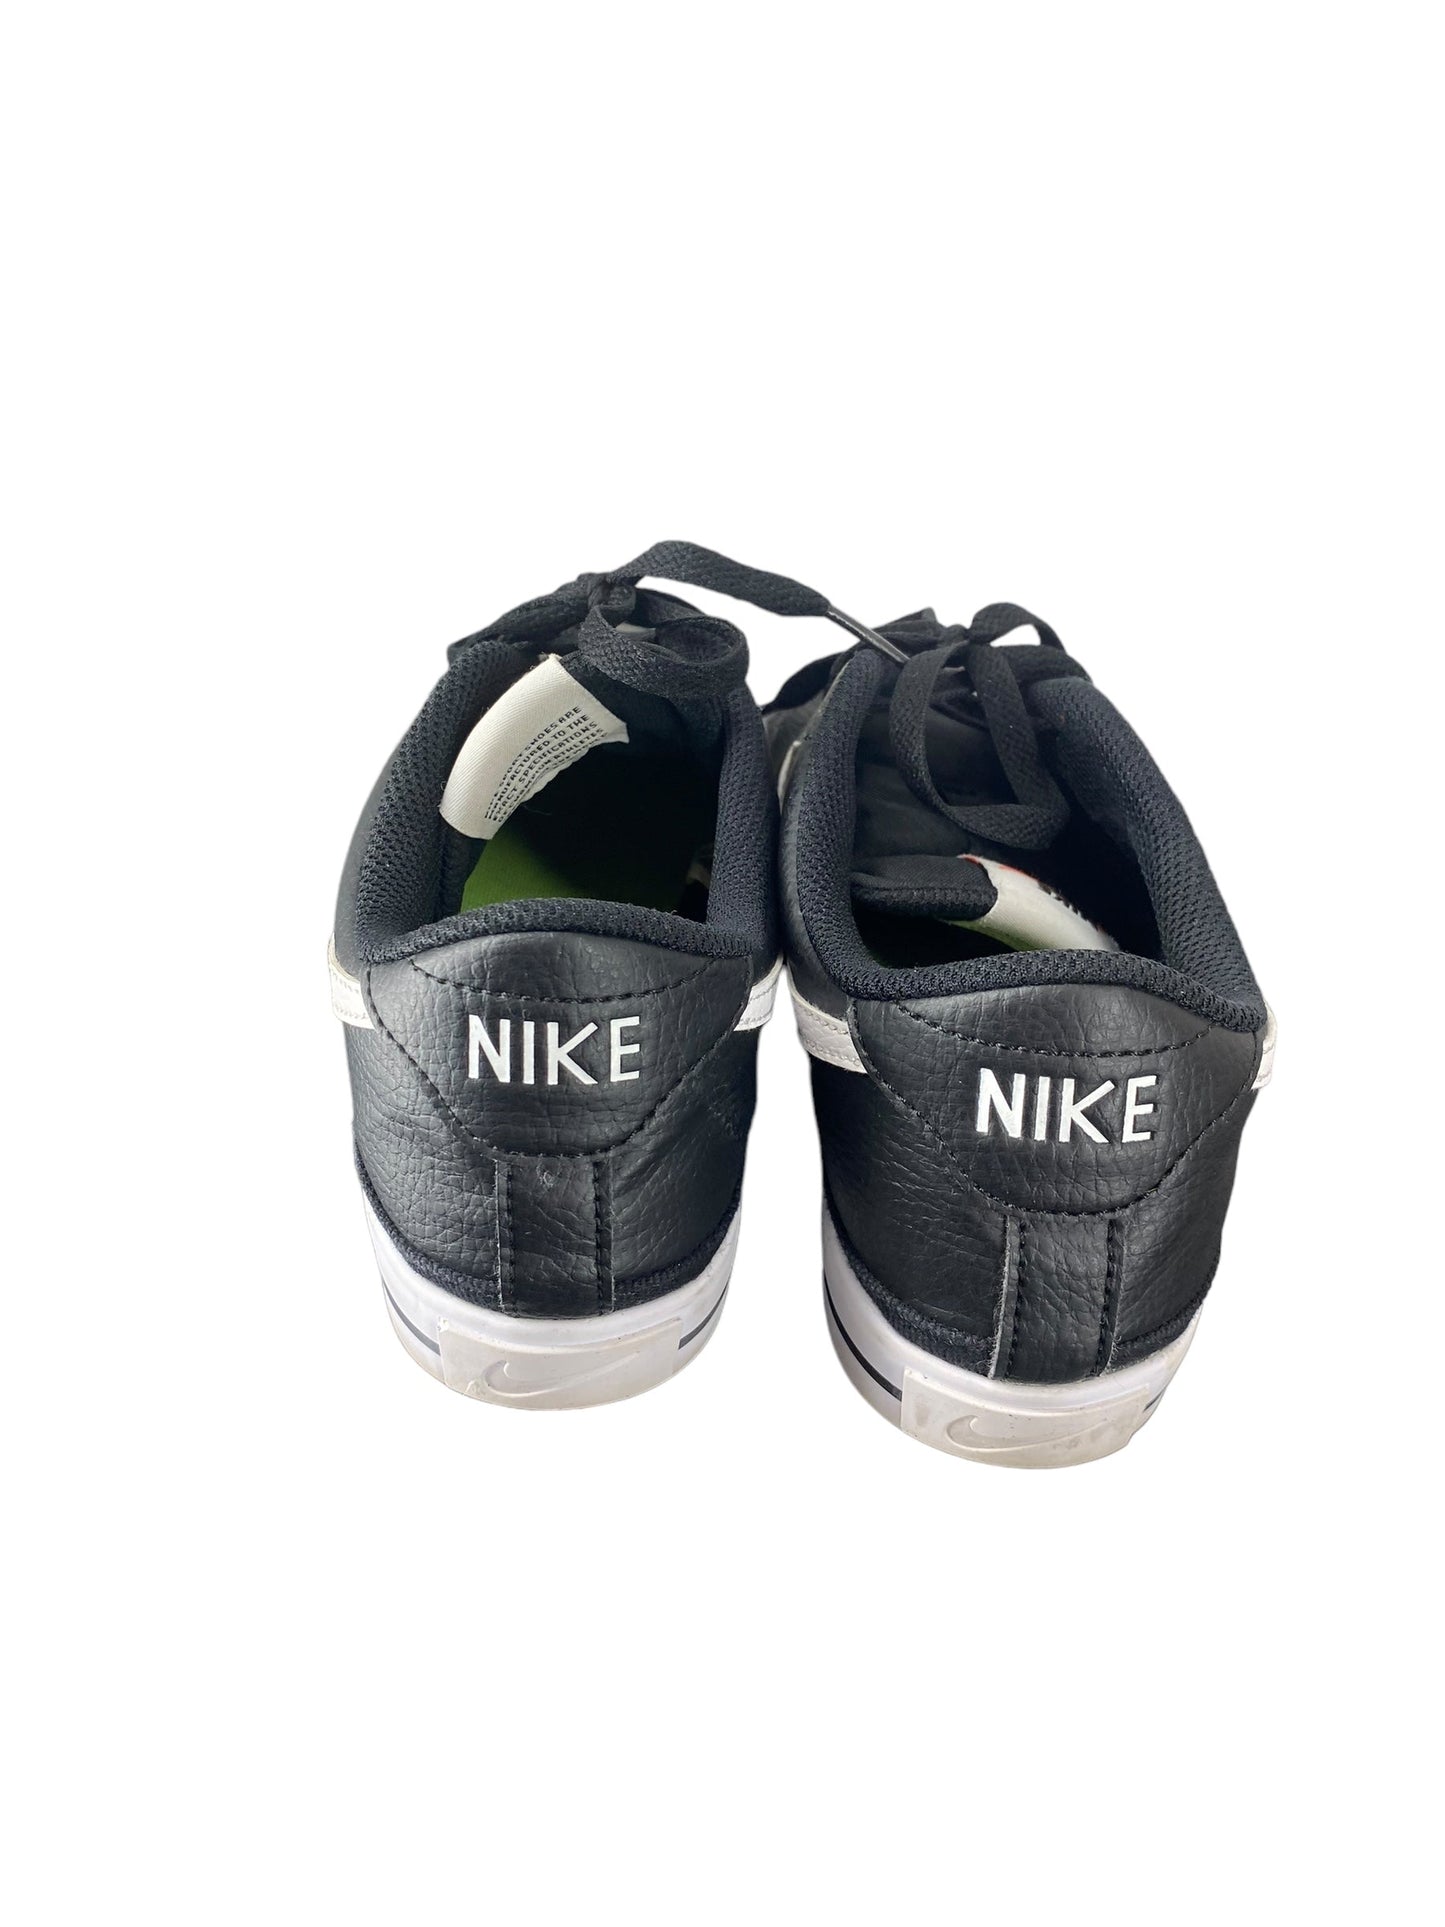 Black Shoes Sneakers Nike, Size 8